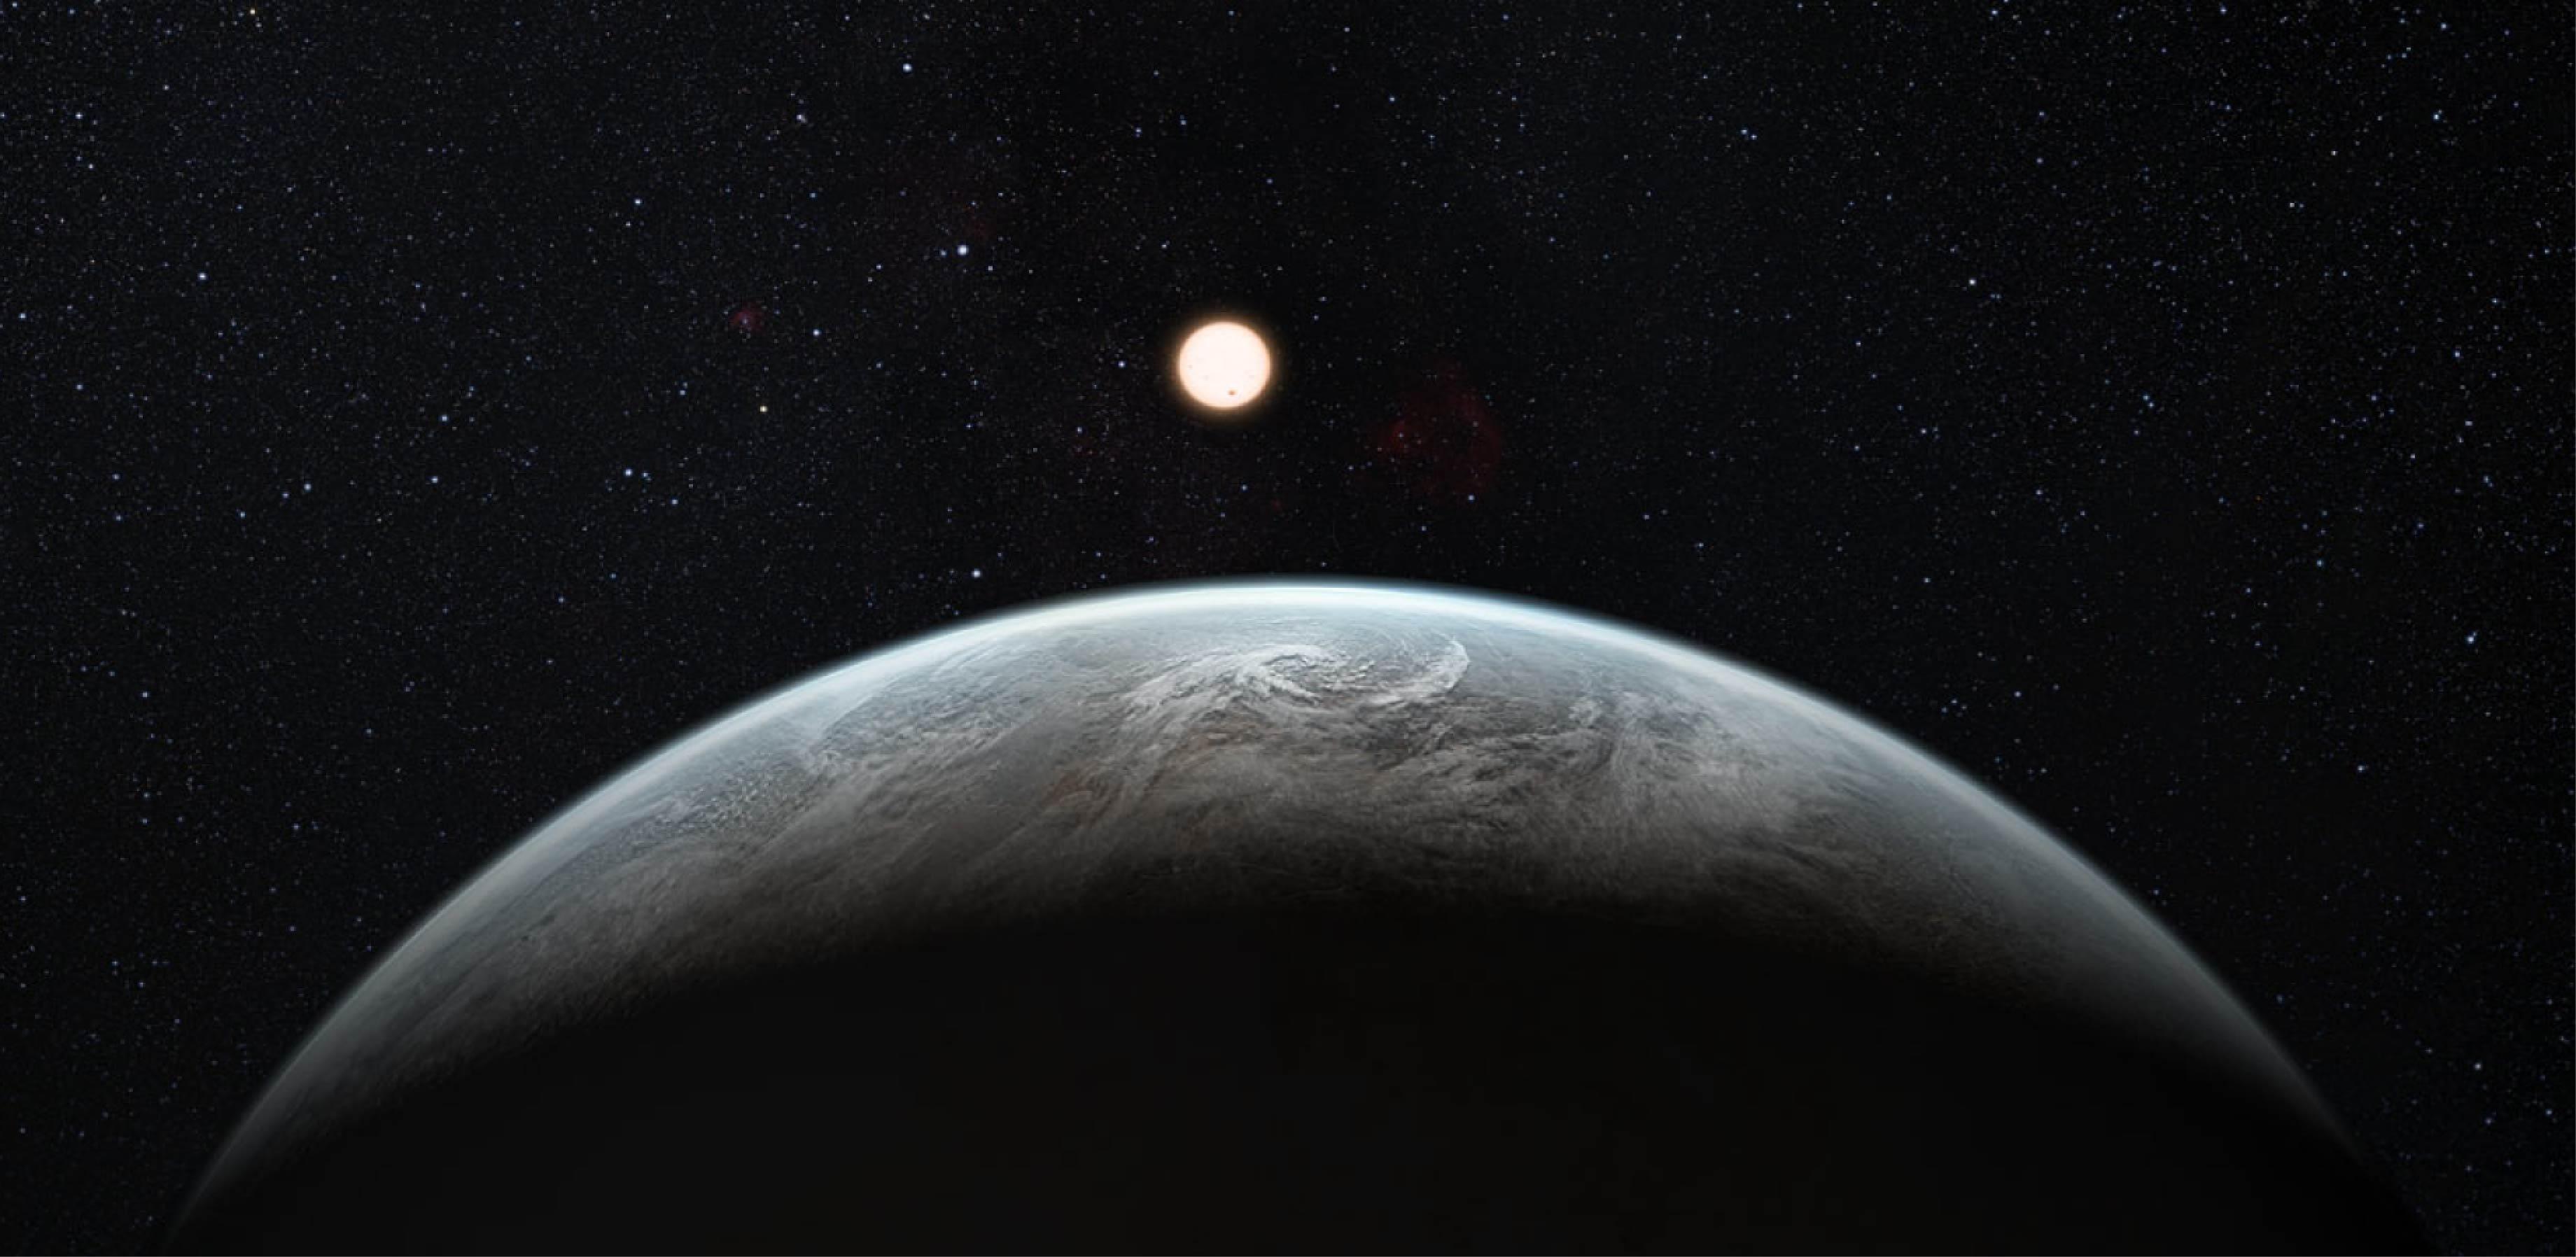 Artist’s impression of one of more than 50 new exoplanets found by HARPS